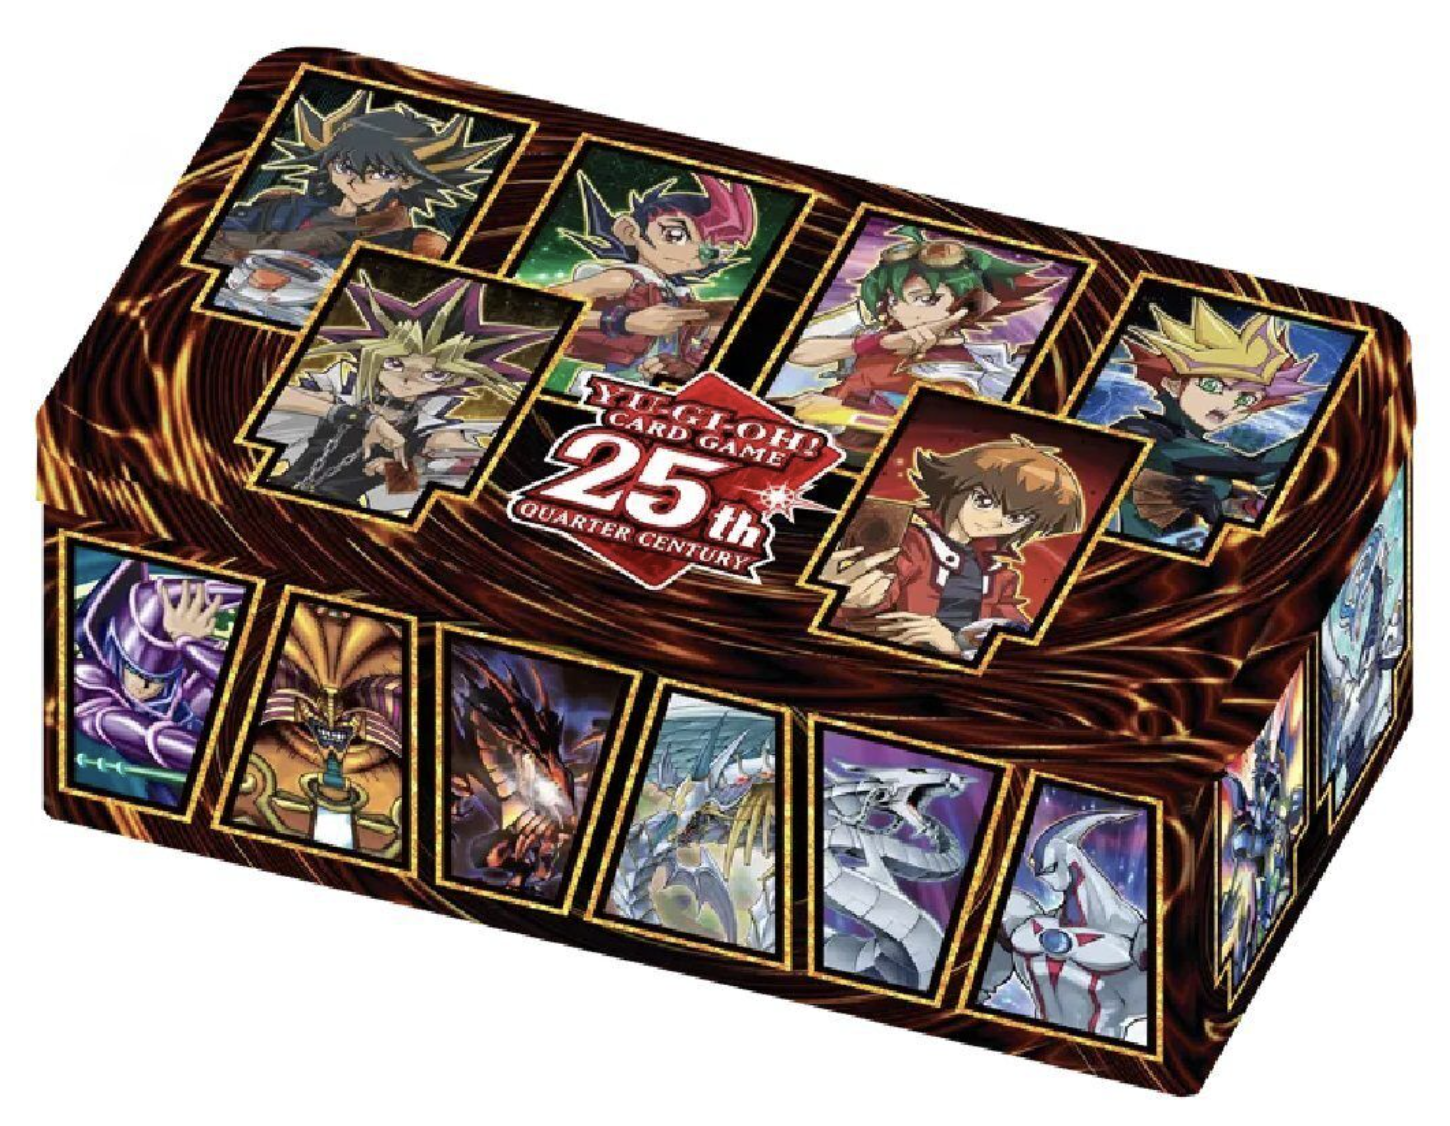 300 assorted Yugioh cards in a Yugioh tin